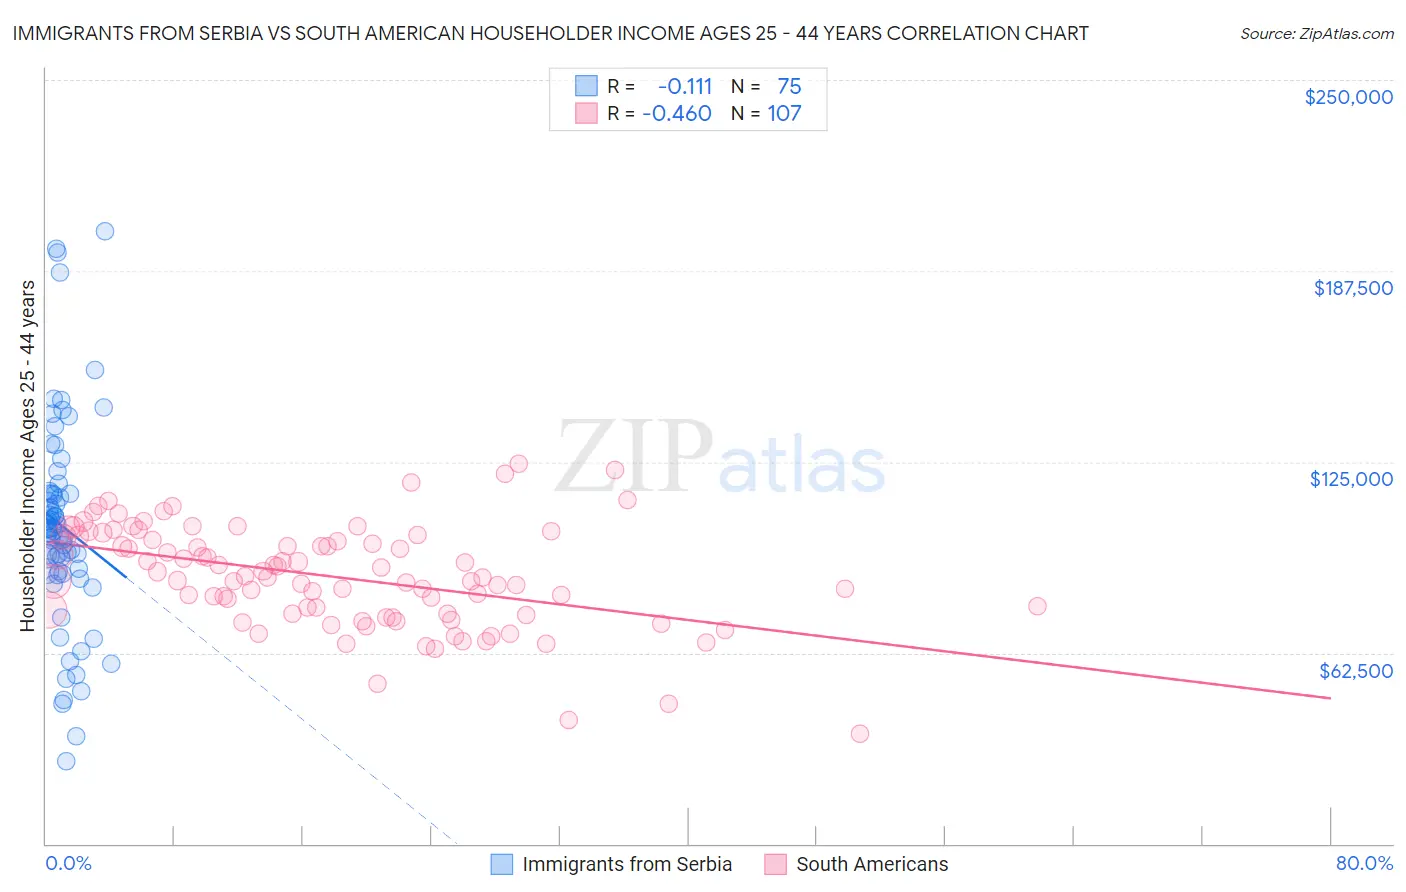 Immigrants from Serbia vs South American Householder Income Ages 25 - 44 years